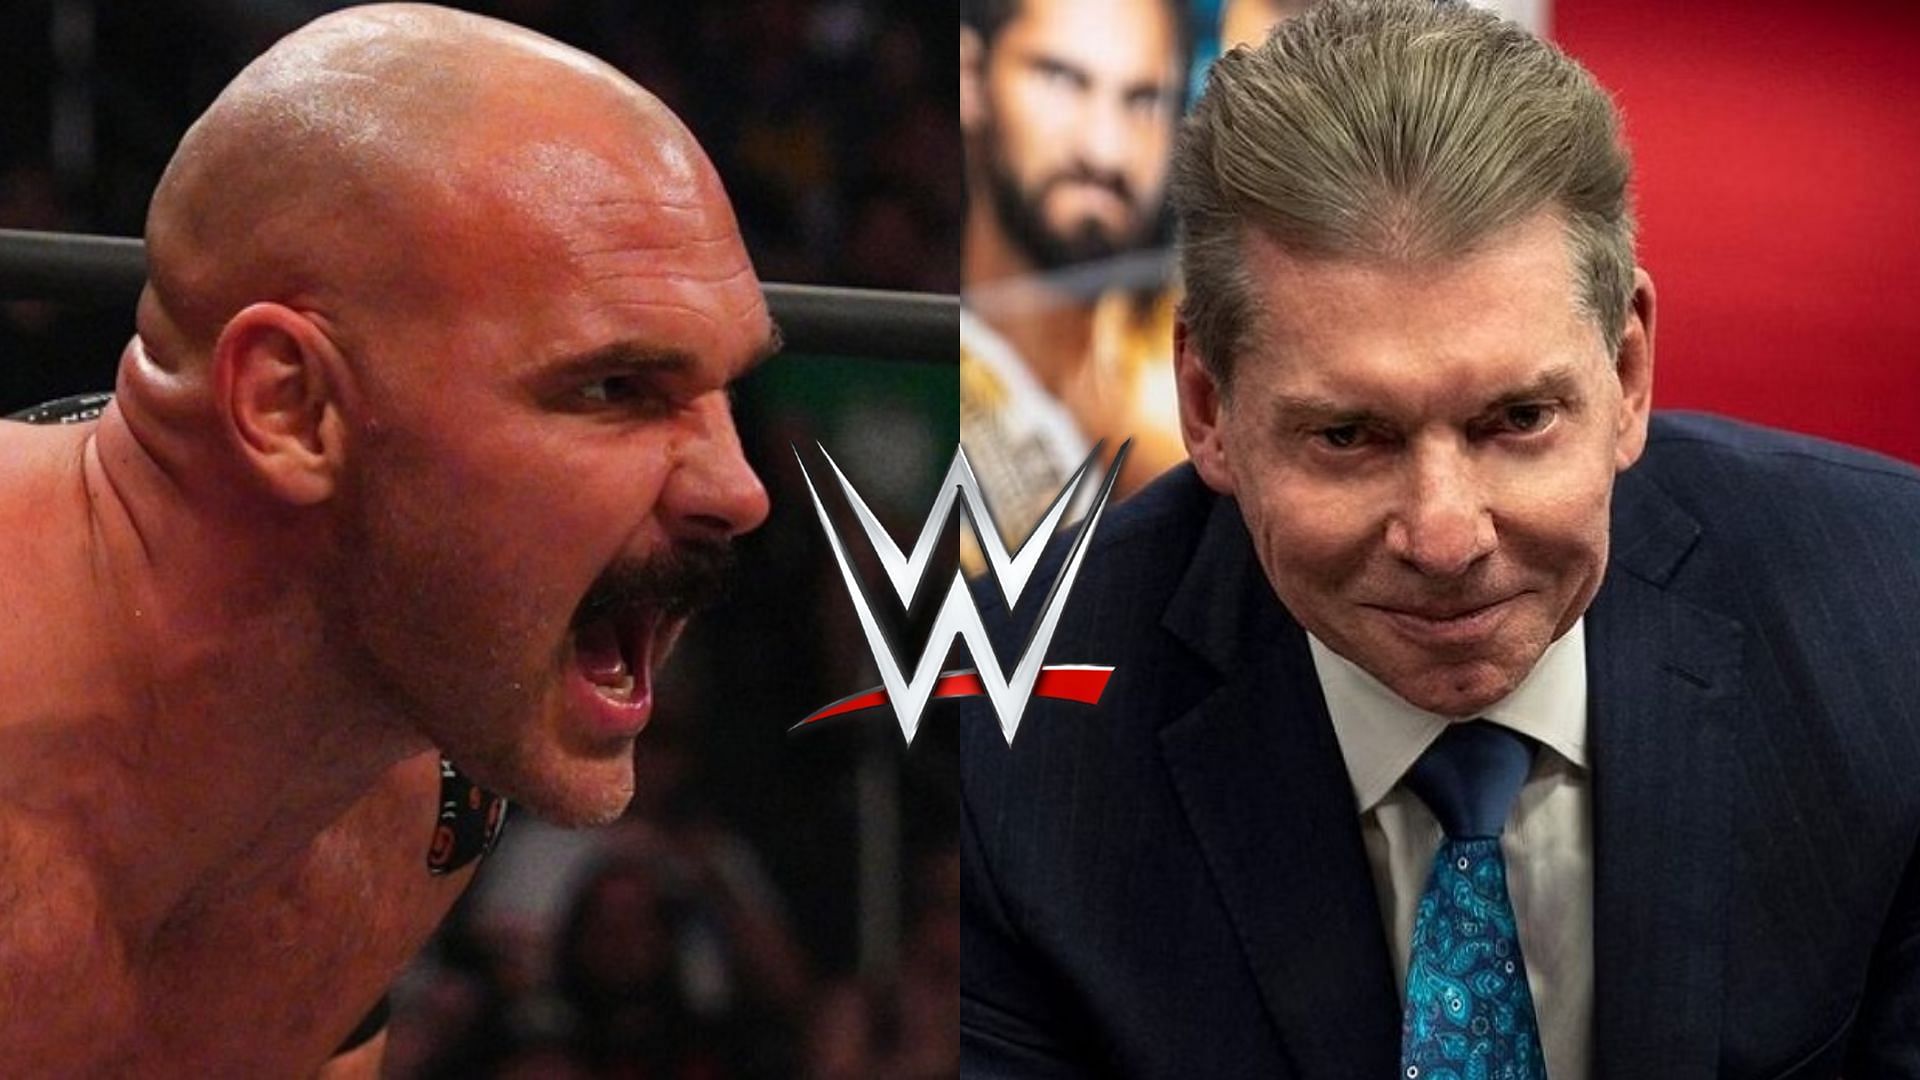 Dax Harwood (left), Vince McMahon (right)